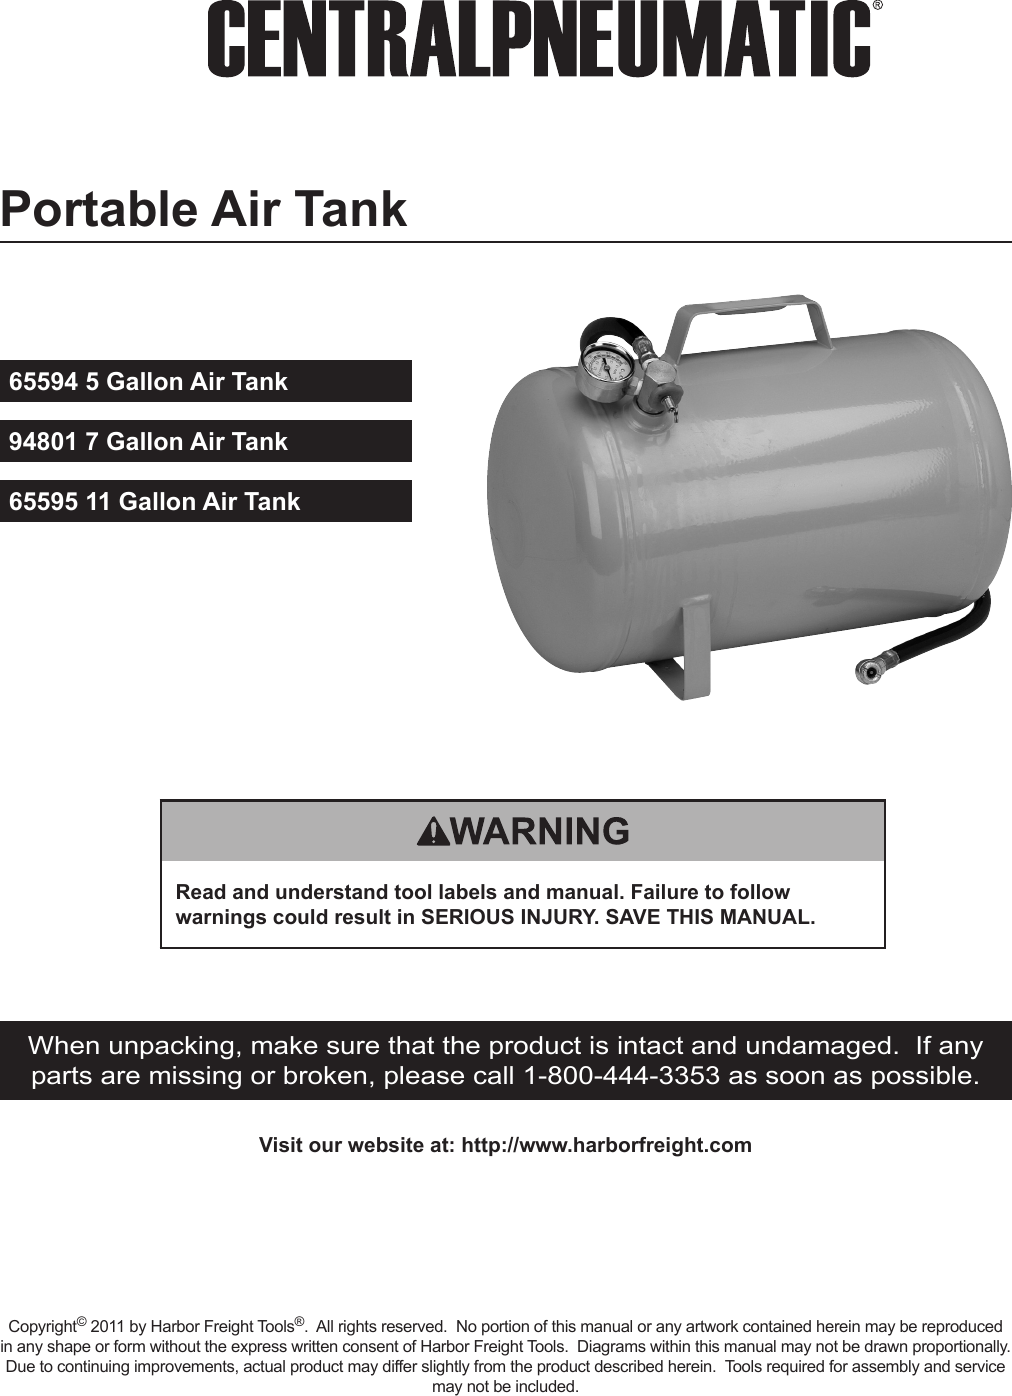 Page 1 of 7 - Harbor-Freight Harbor-Freight-11-Gal-Portable-Air-Tank-Product-Manual-  Harbor-freight-11-gal-portable-air-tank-product-manual